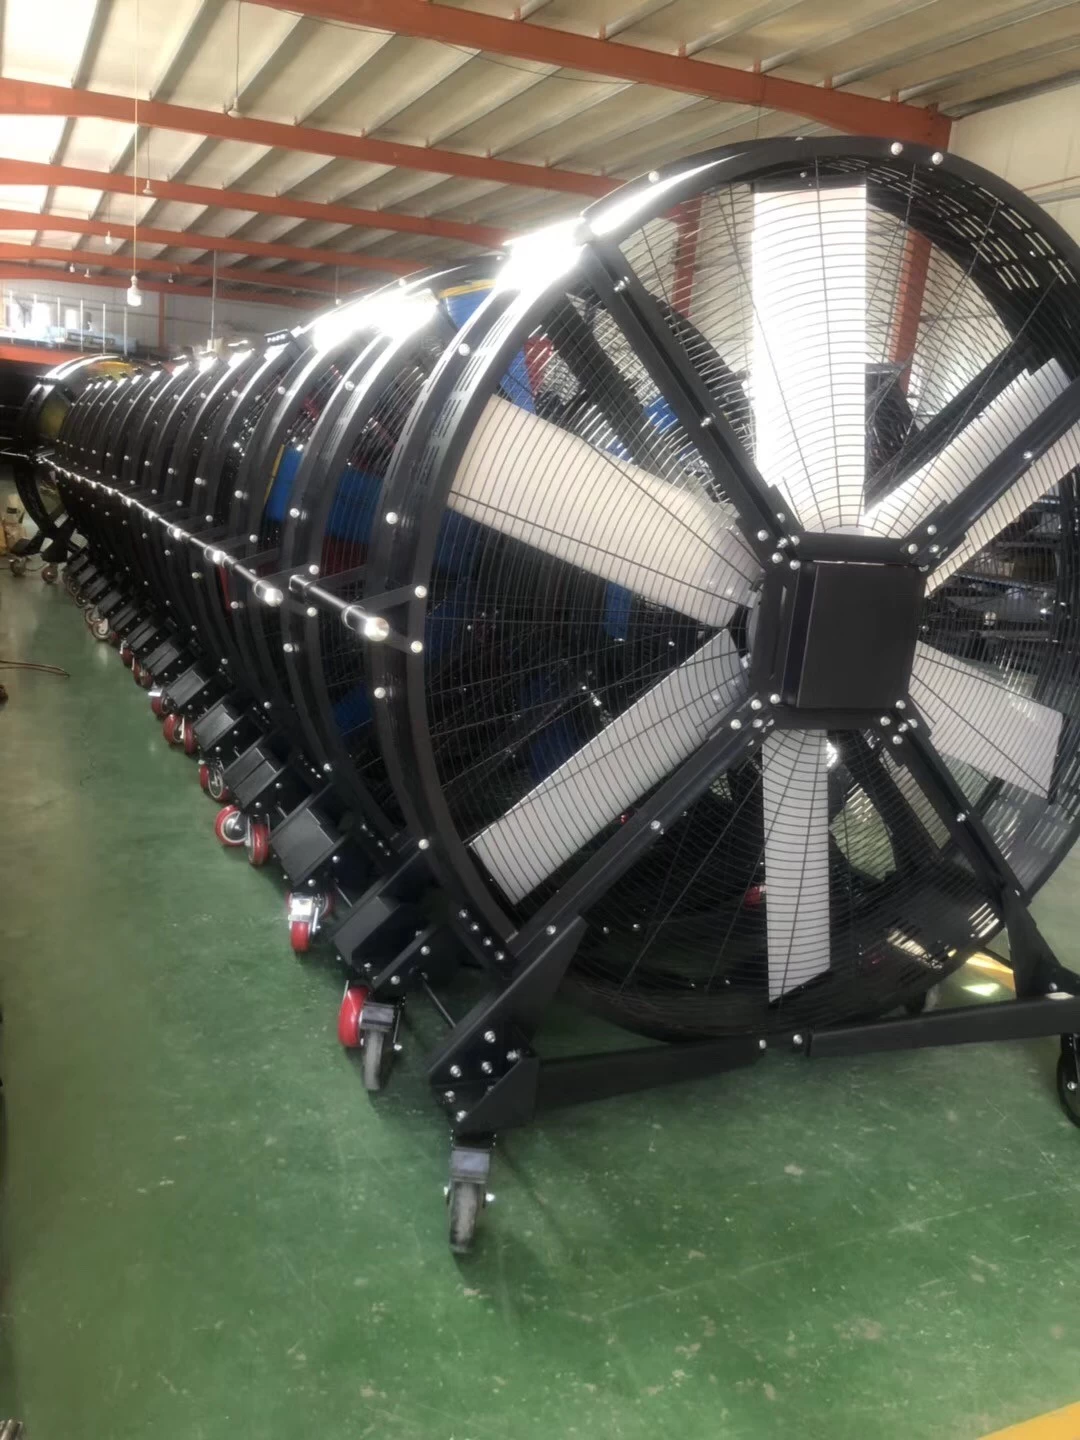 High Quality Cheap Price Industrial Floor Stand Fans for Gym